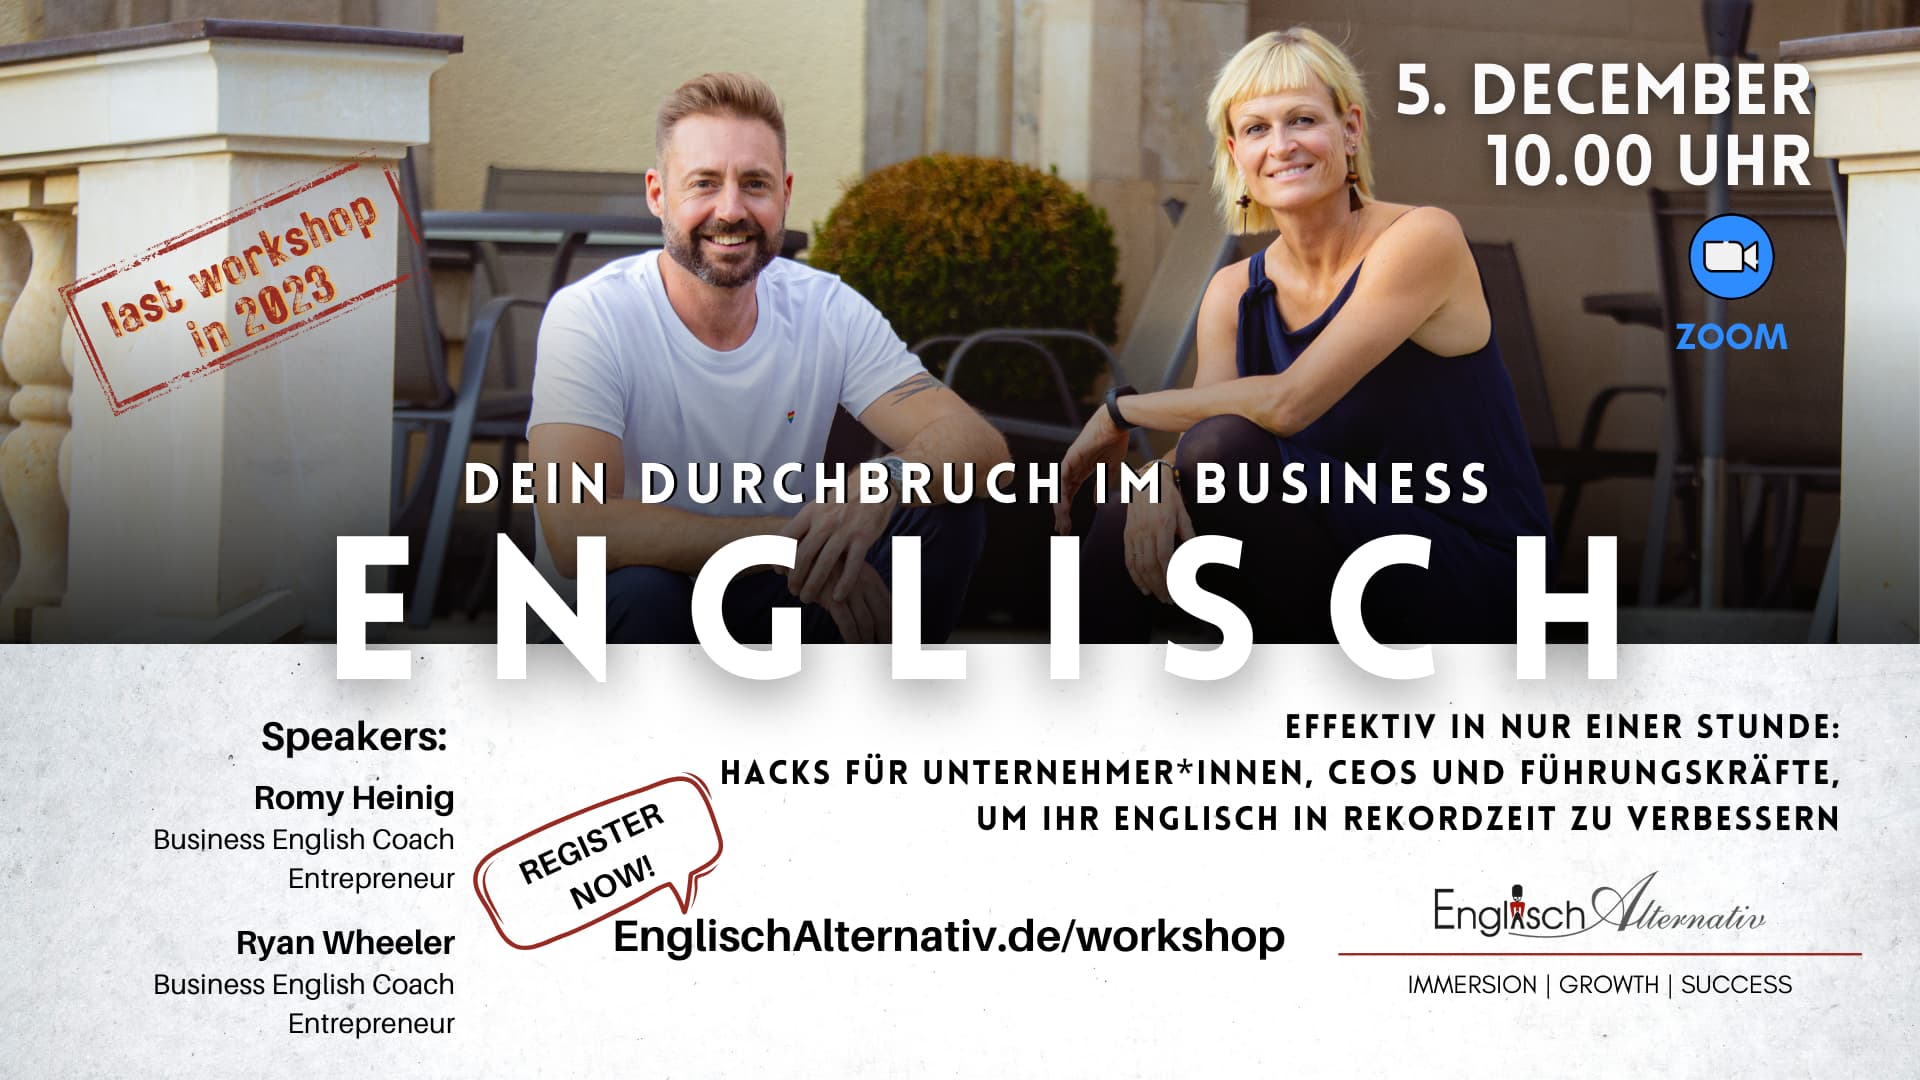 Business English Training Coaching  online privat, 
the best course in Germany